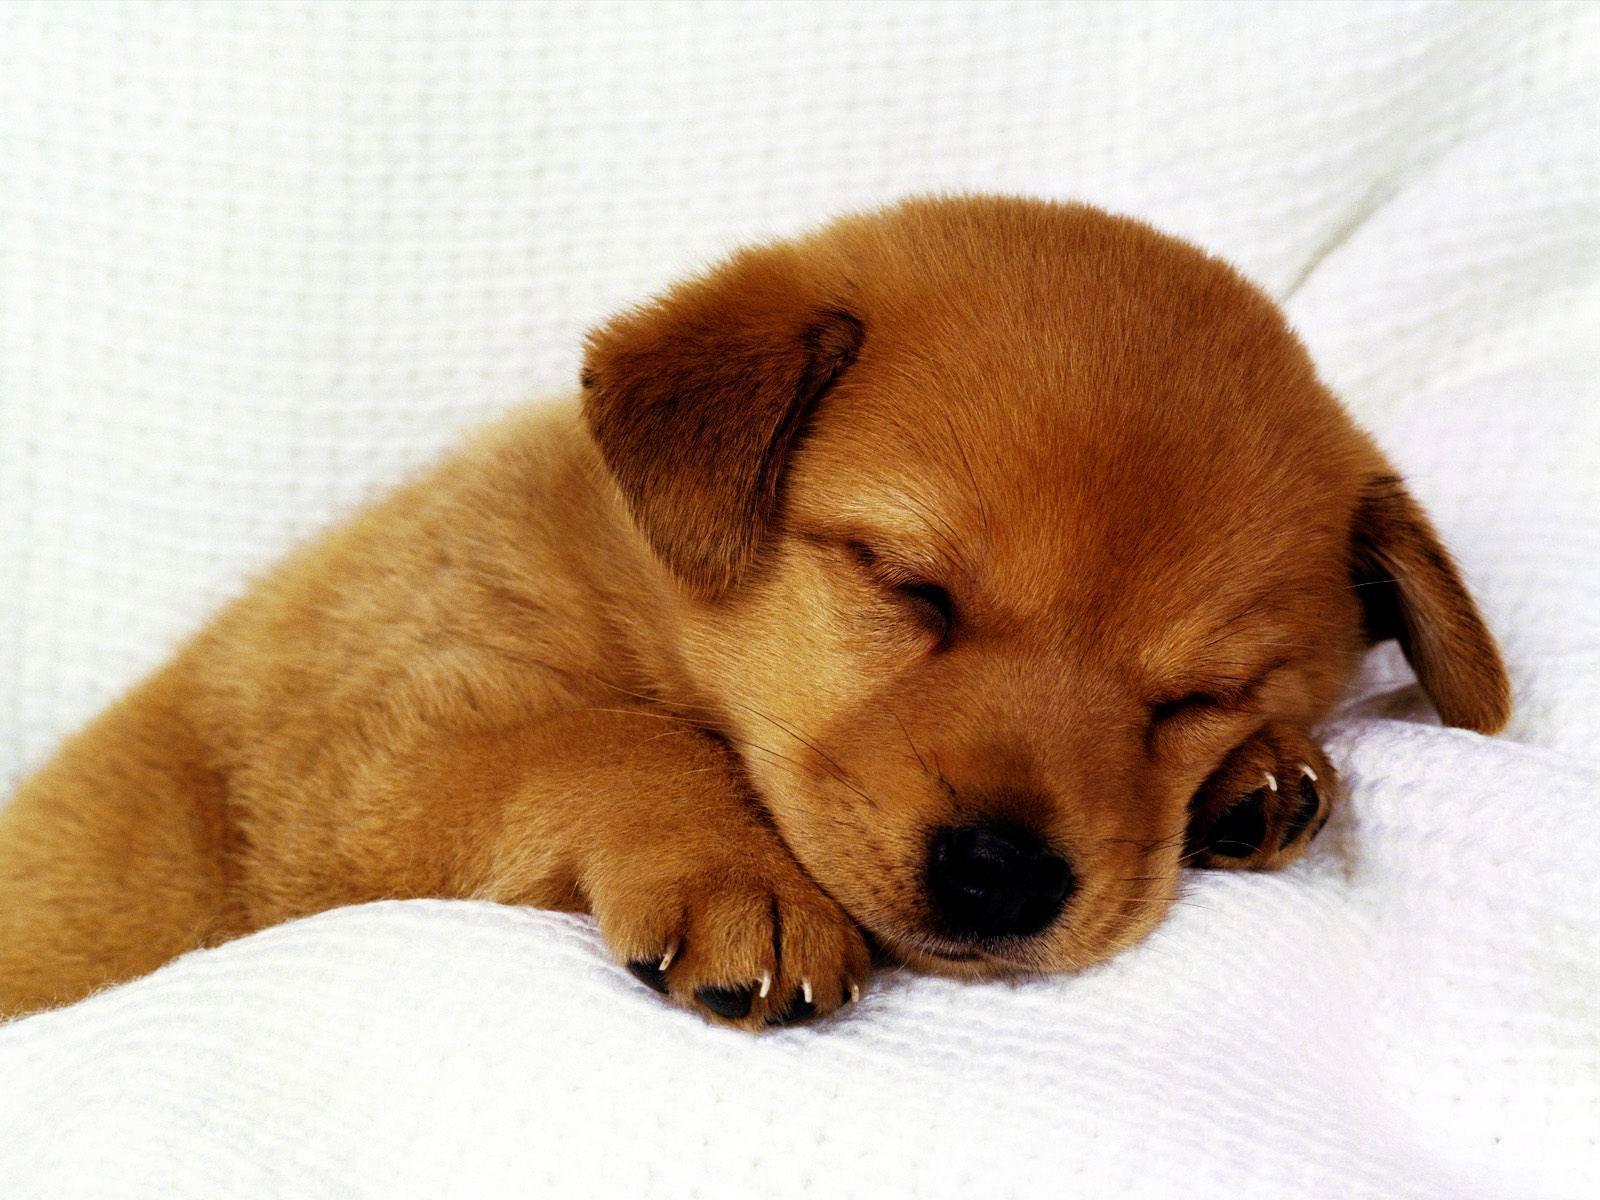 Wallpaper for Gt Cute Puppy Mobile 1600x1200PX Cute Puppies